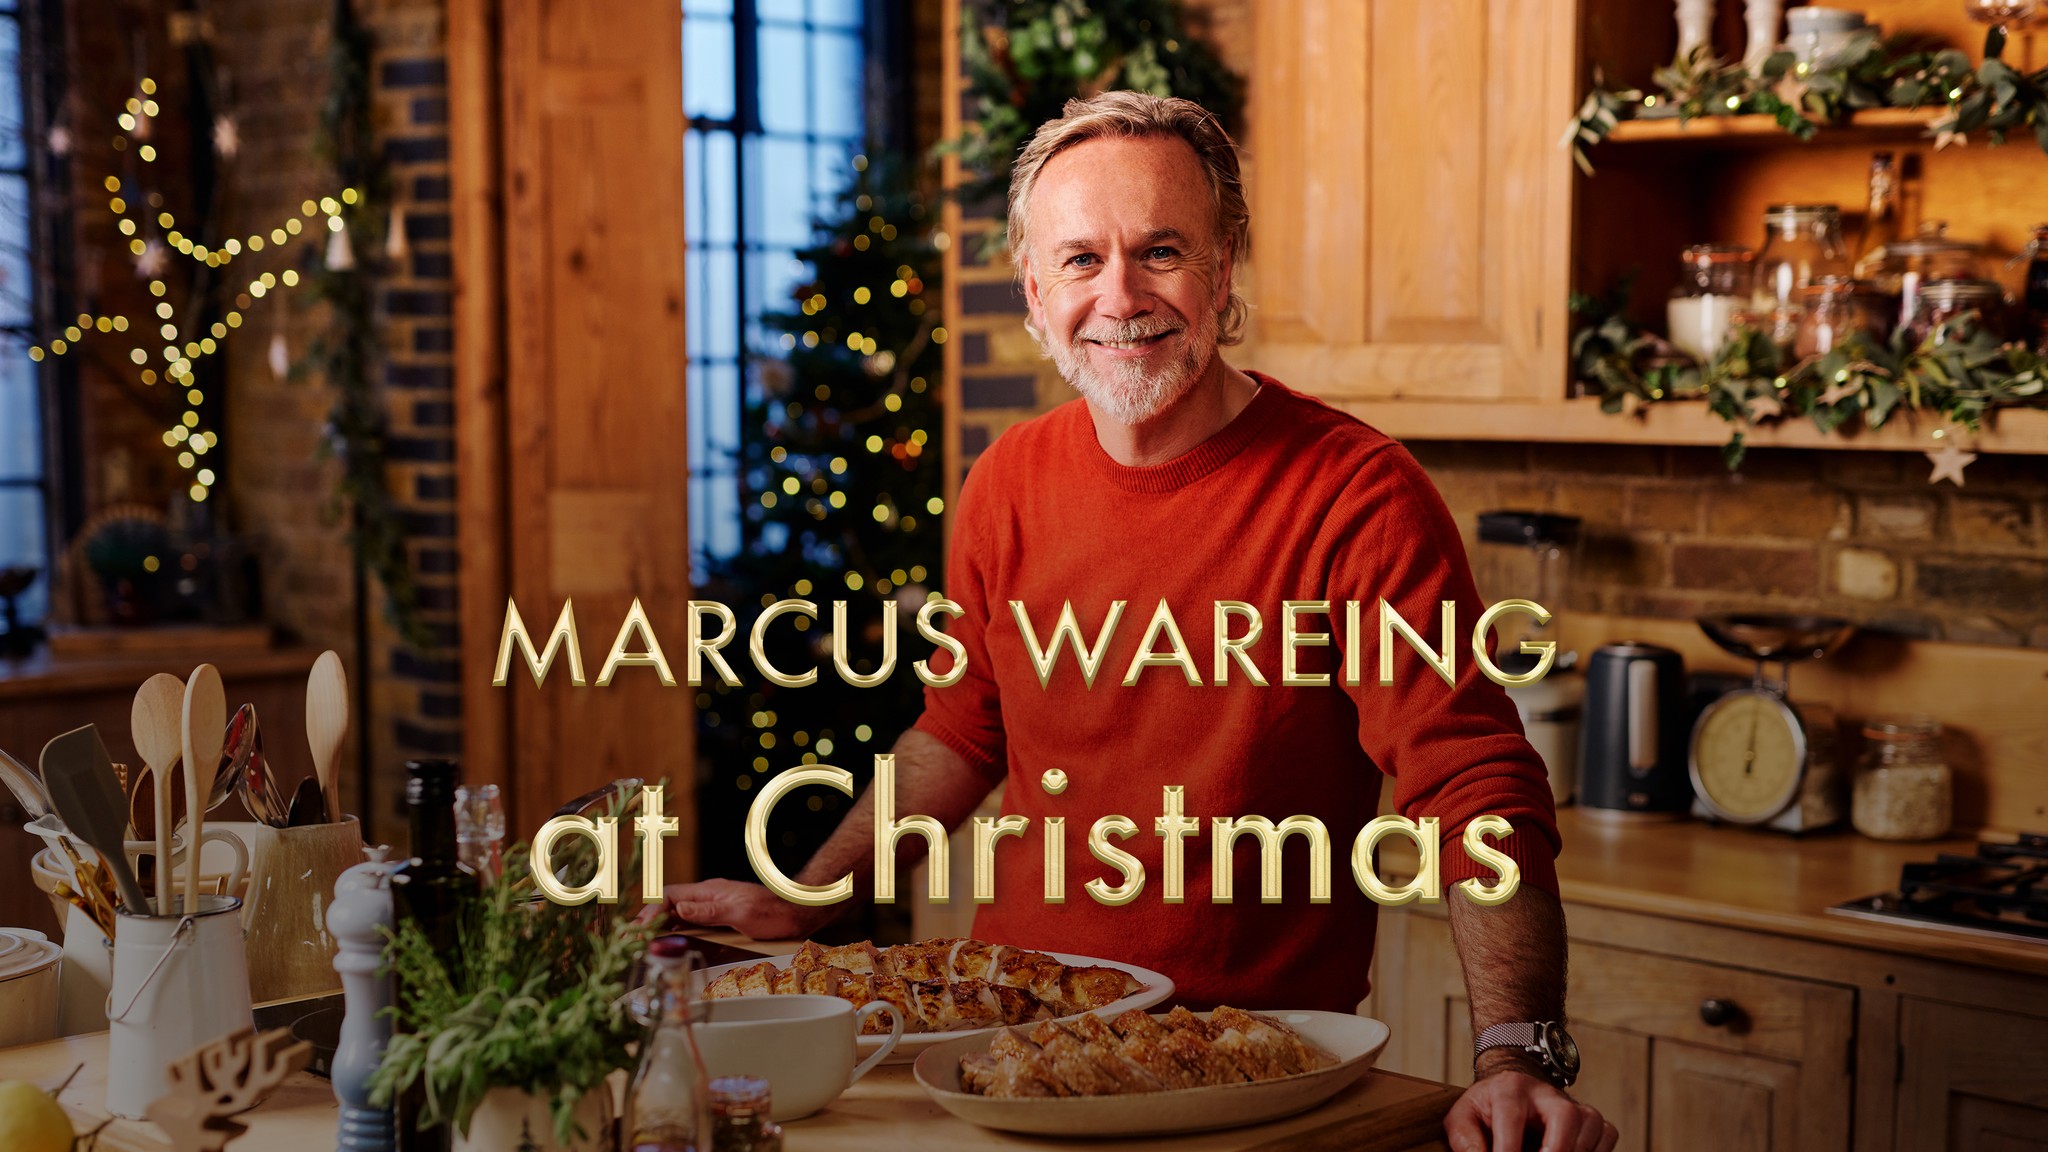 Marcus Wareing wearing red jumper in a home kitchen surrounded by festive dishes